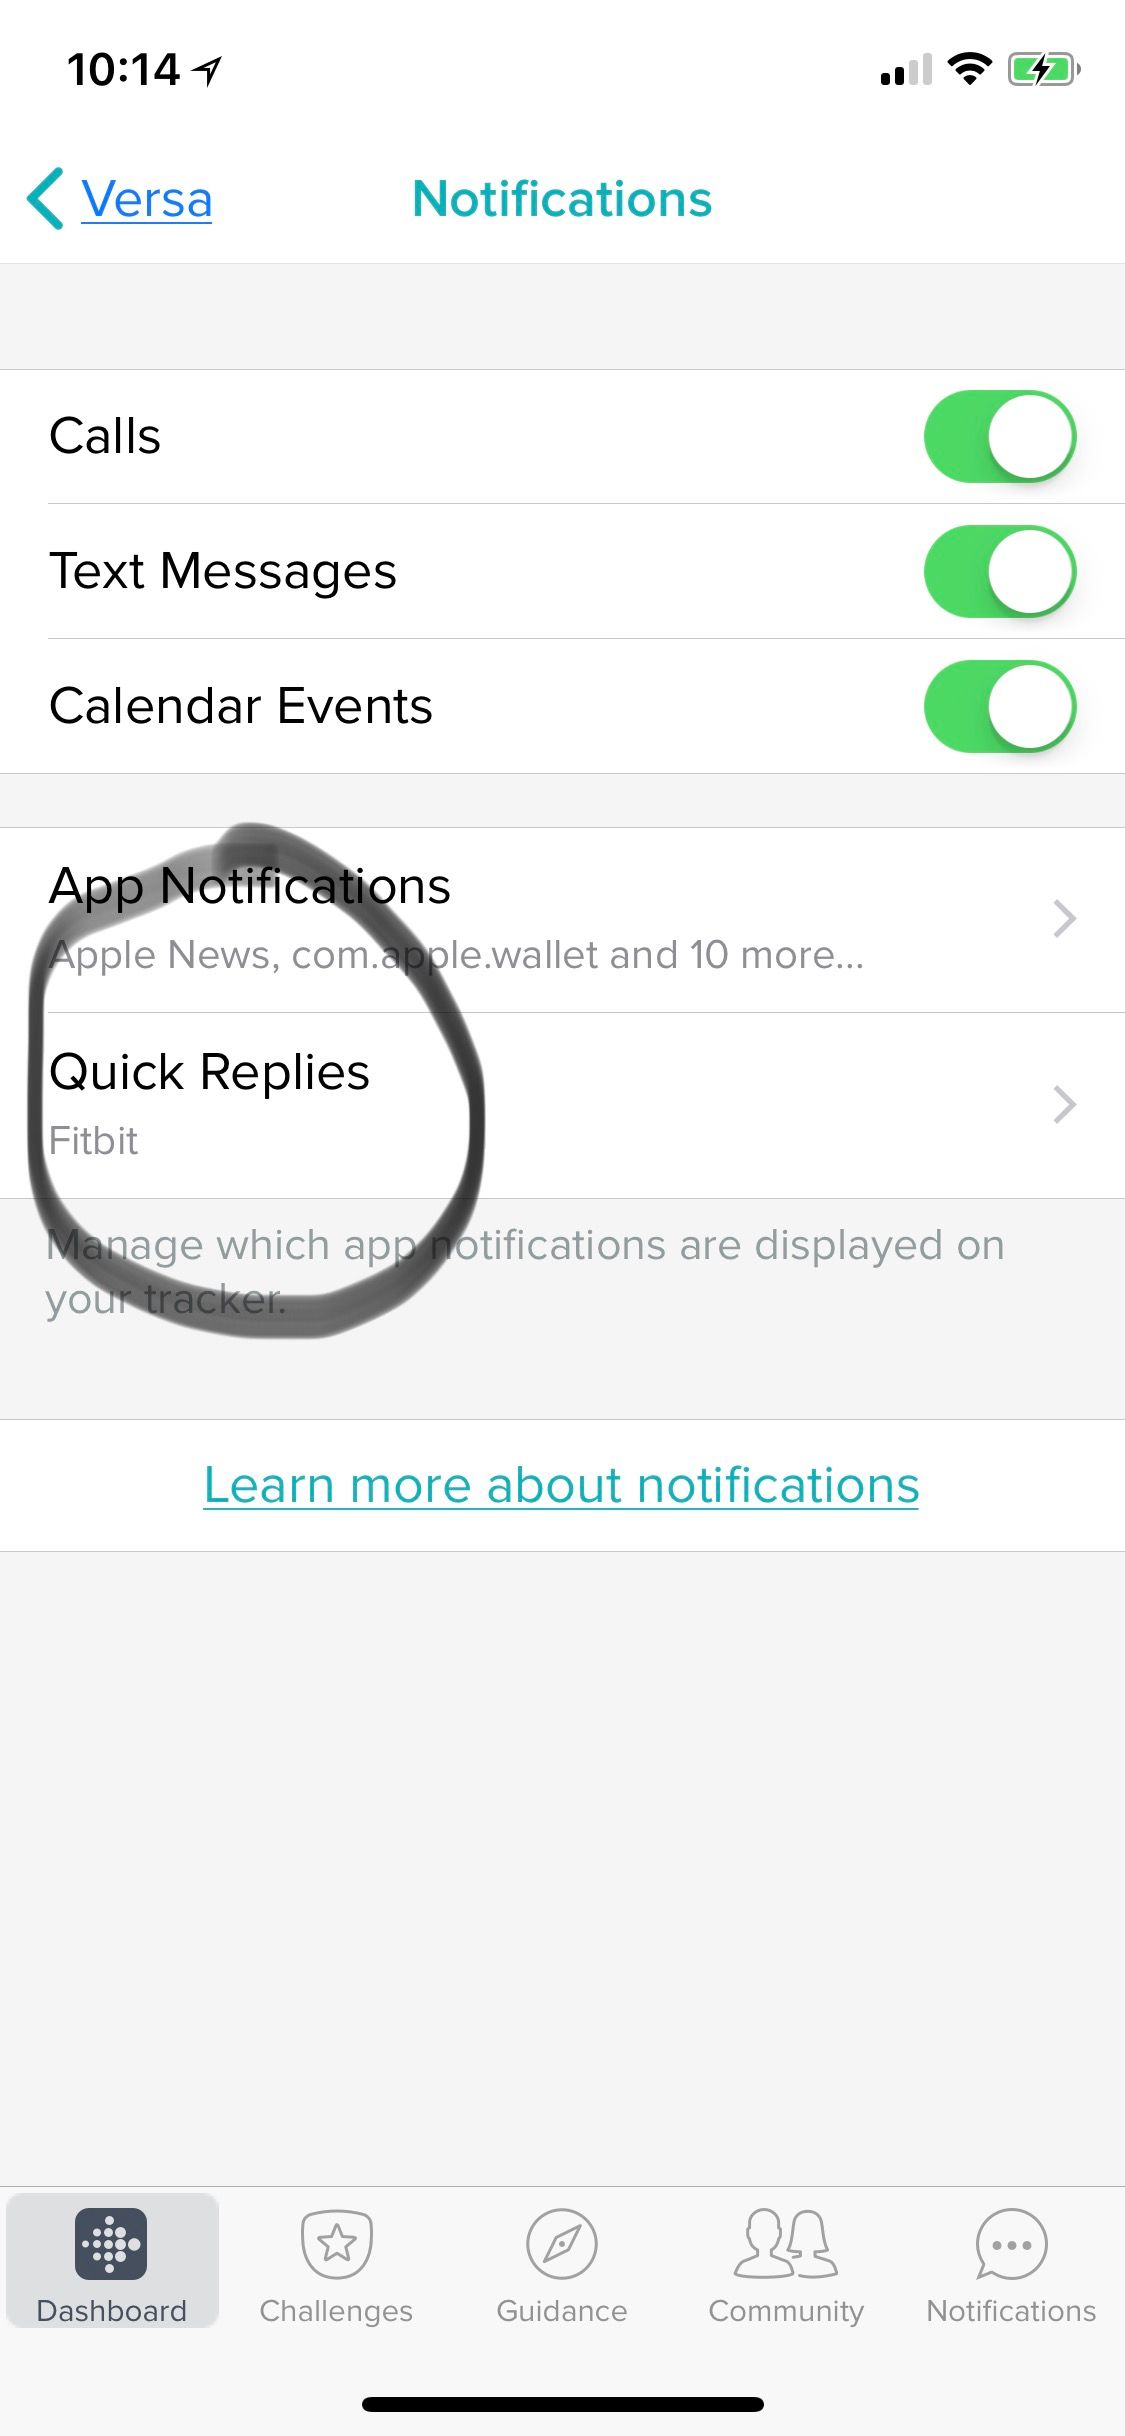 Are Quick Replies available on iOS 